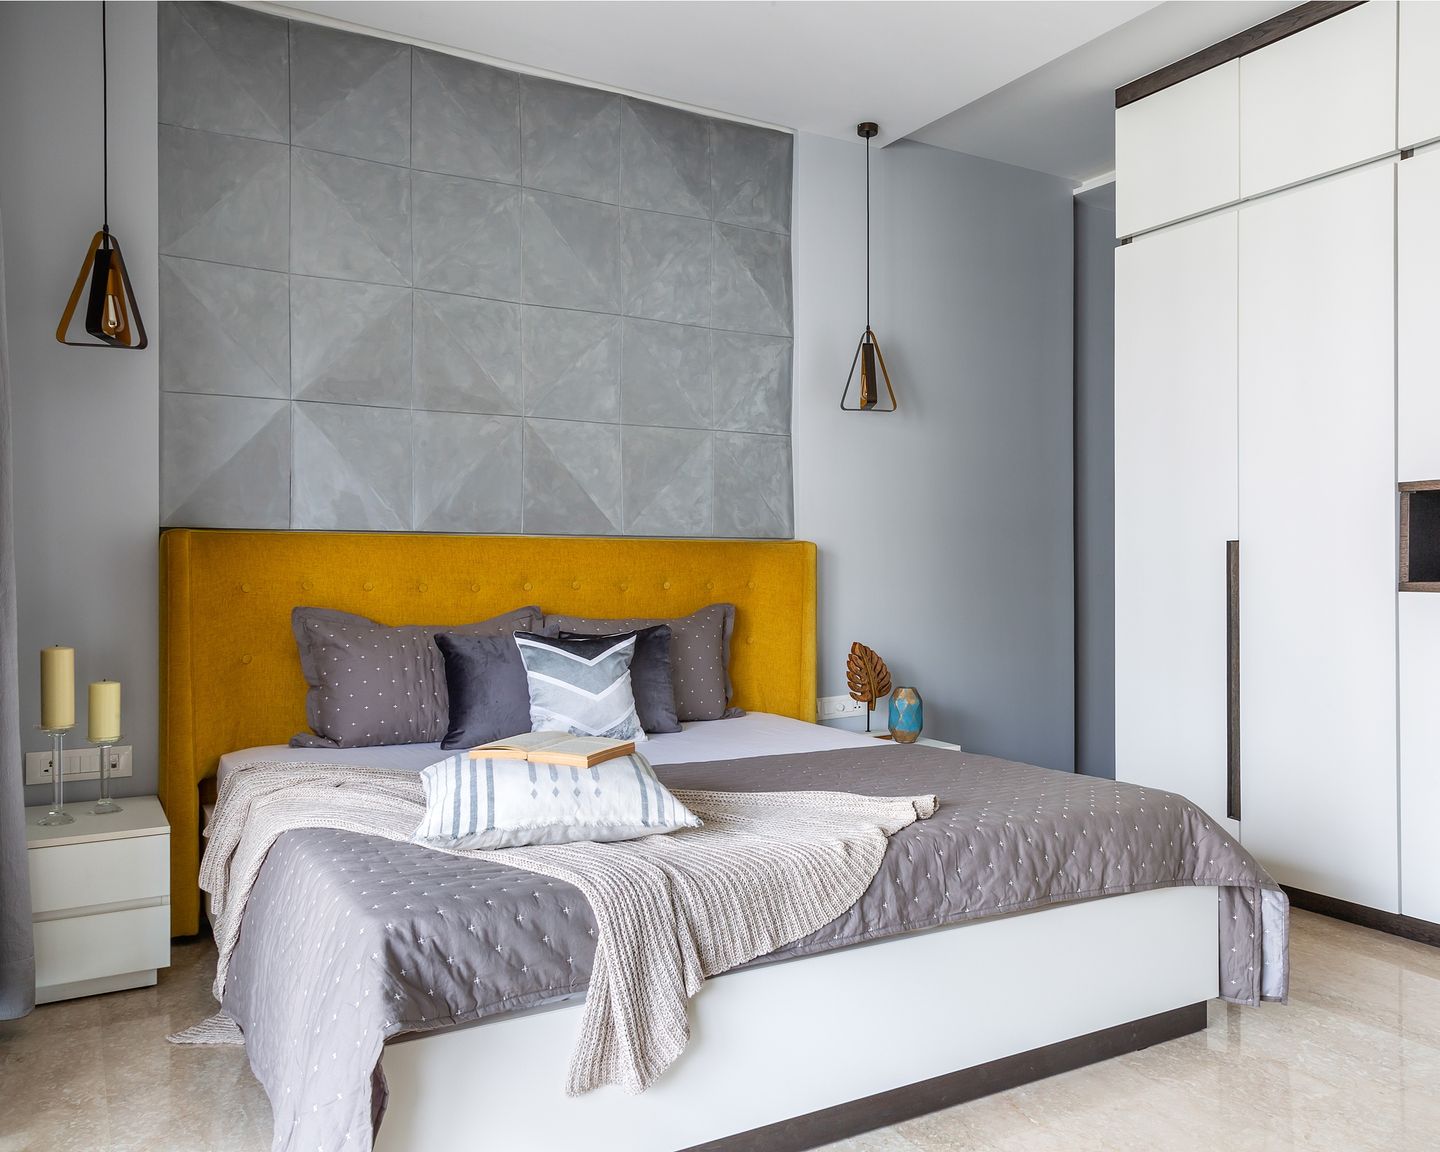 Grey Wallpaper With Geometric Patterns - Livspace